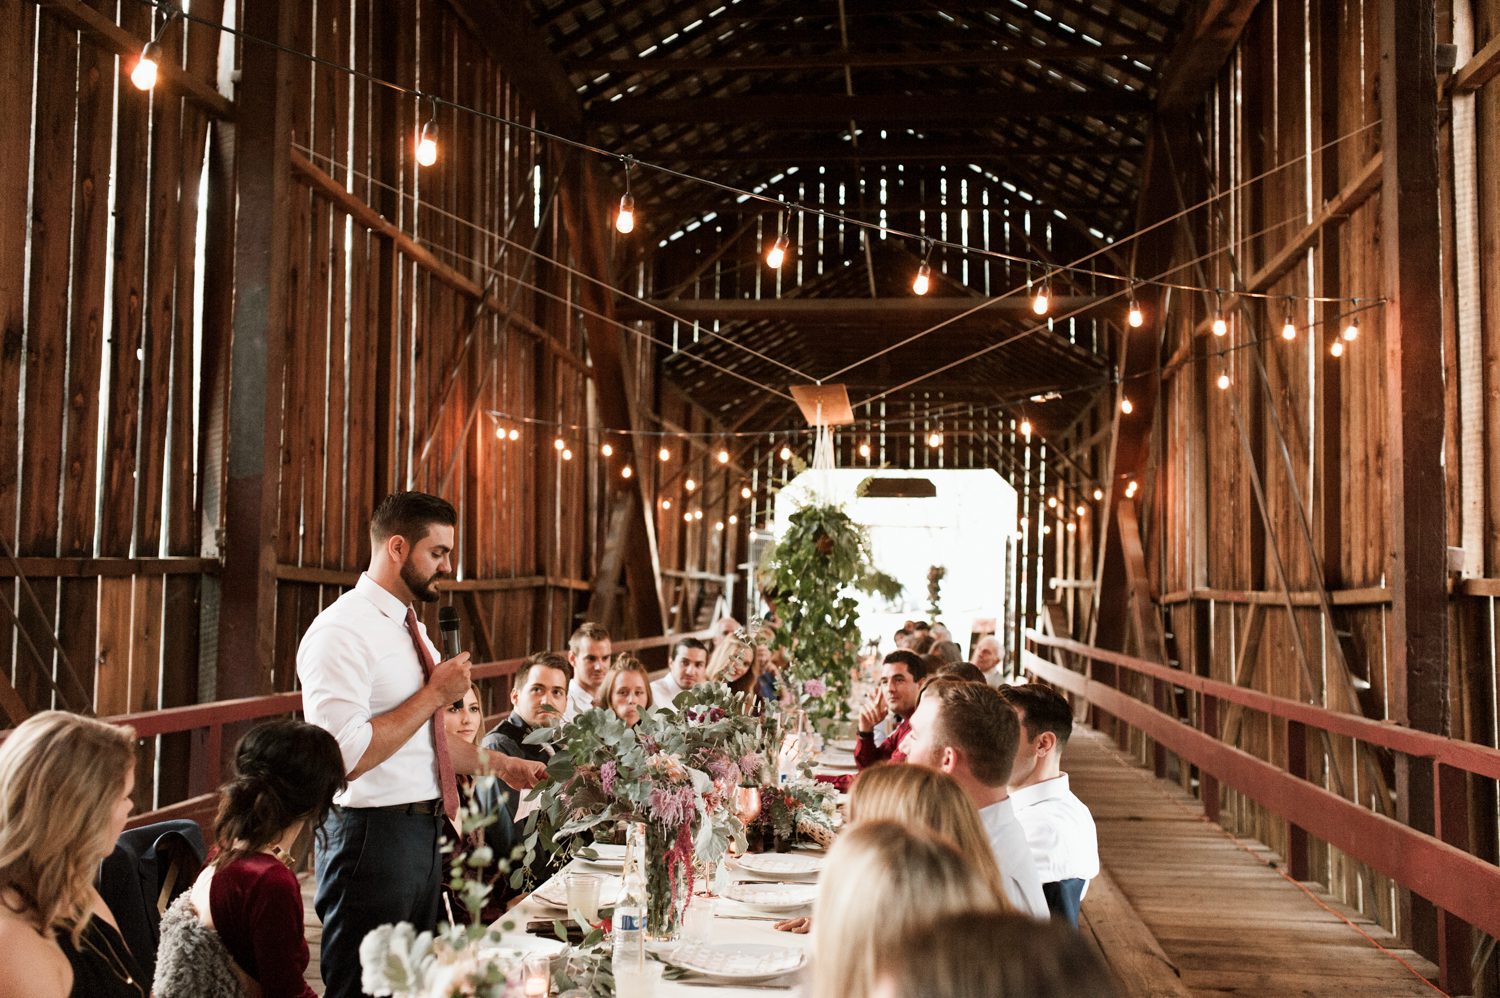 The best man gives a toast to wedding guests in a covered bridge. By West Coast wedding photographer Briana Morrison